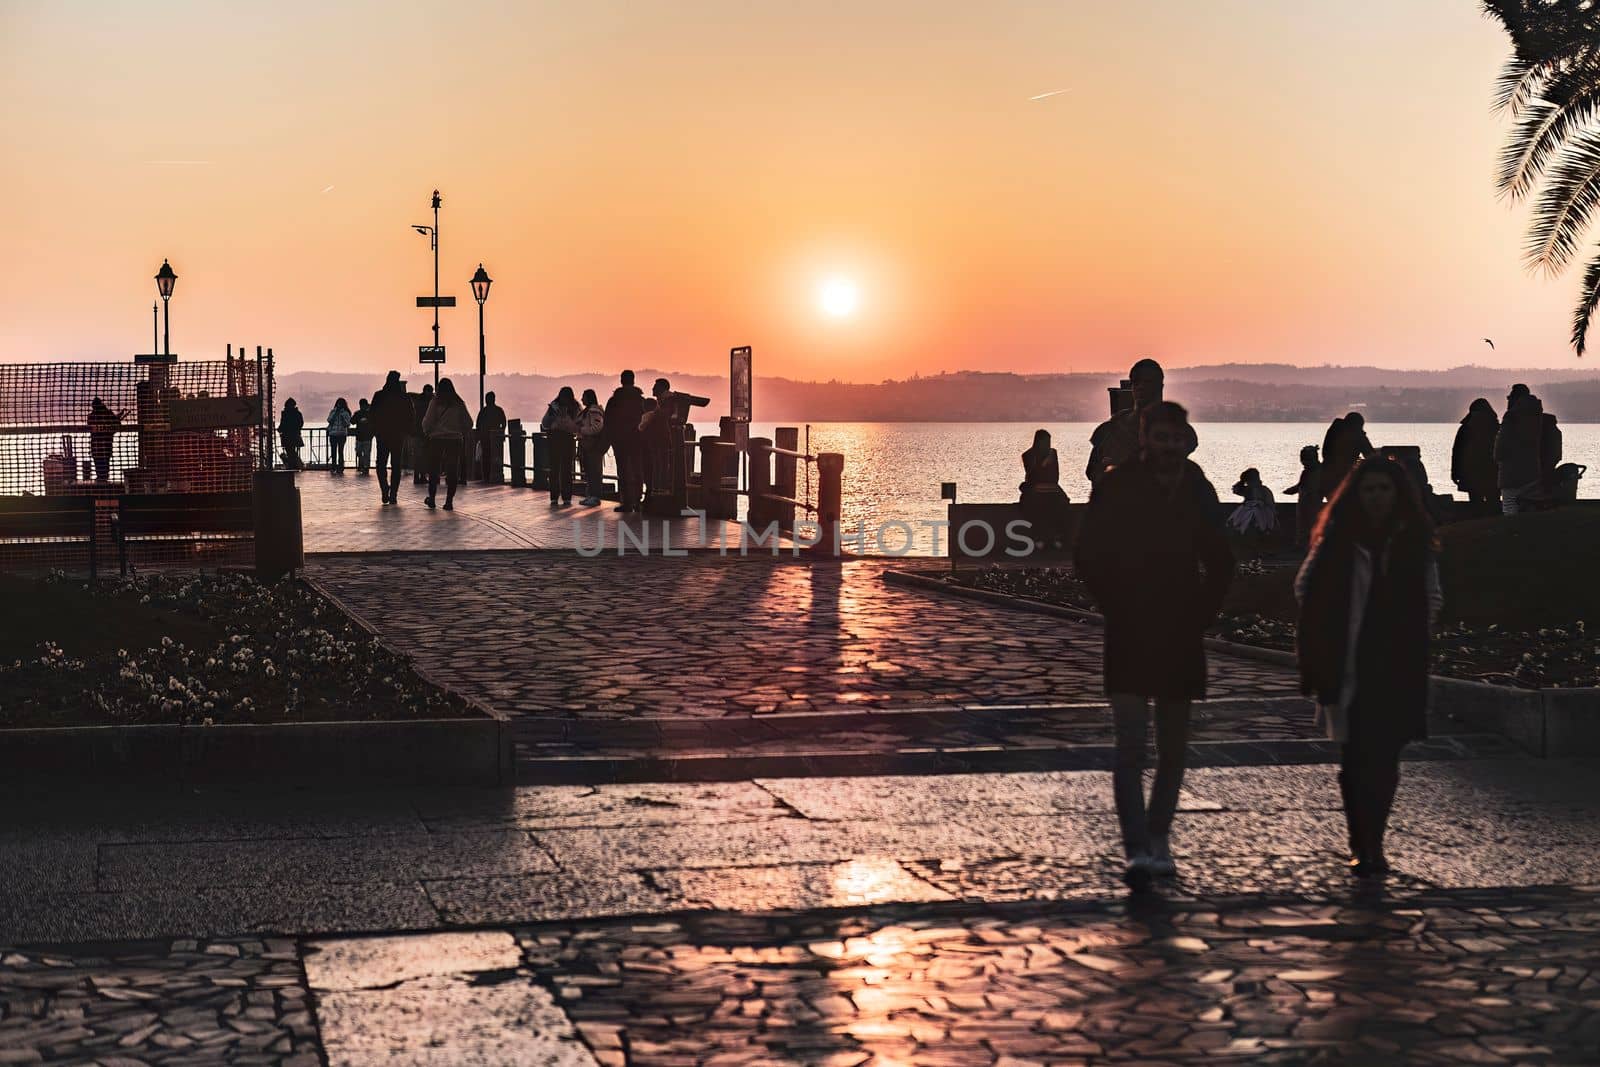 Sirmione, Italy 15 February 2023: A stunning view of Sirmione's landscape at sunset with orange hues, silhouetted people, and the serene lake in the background.